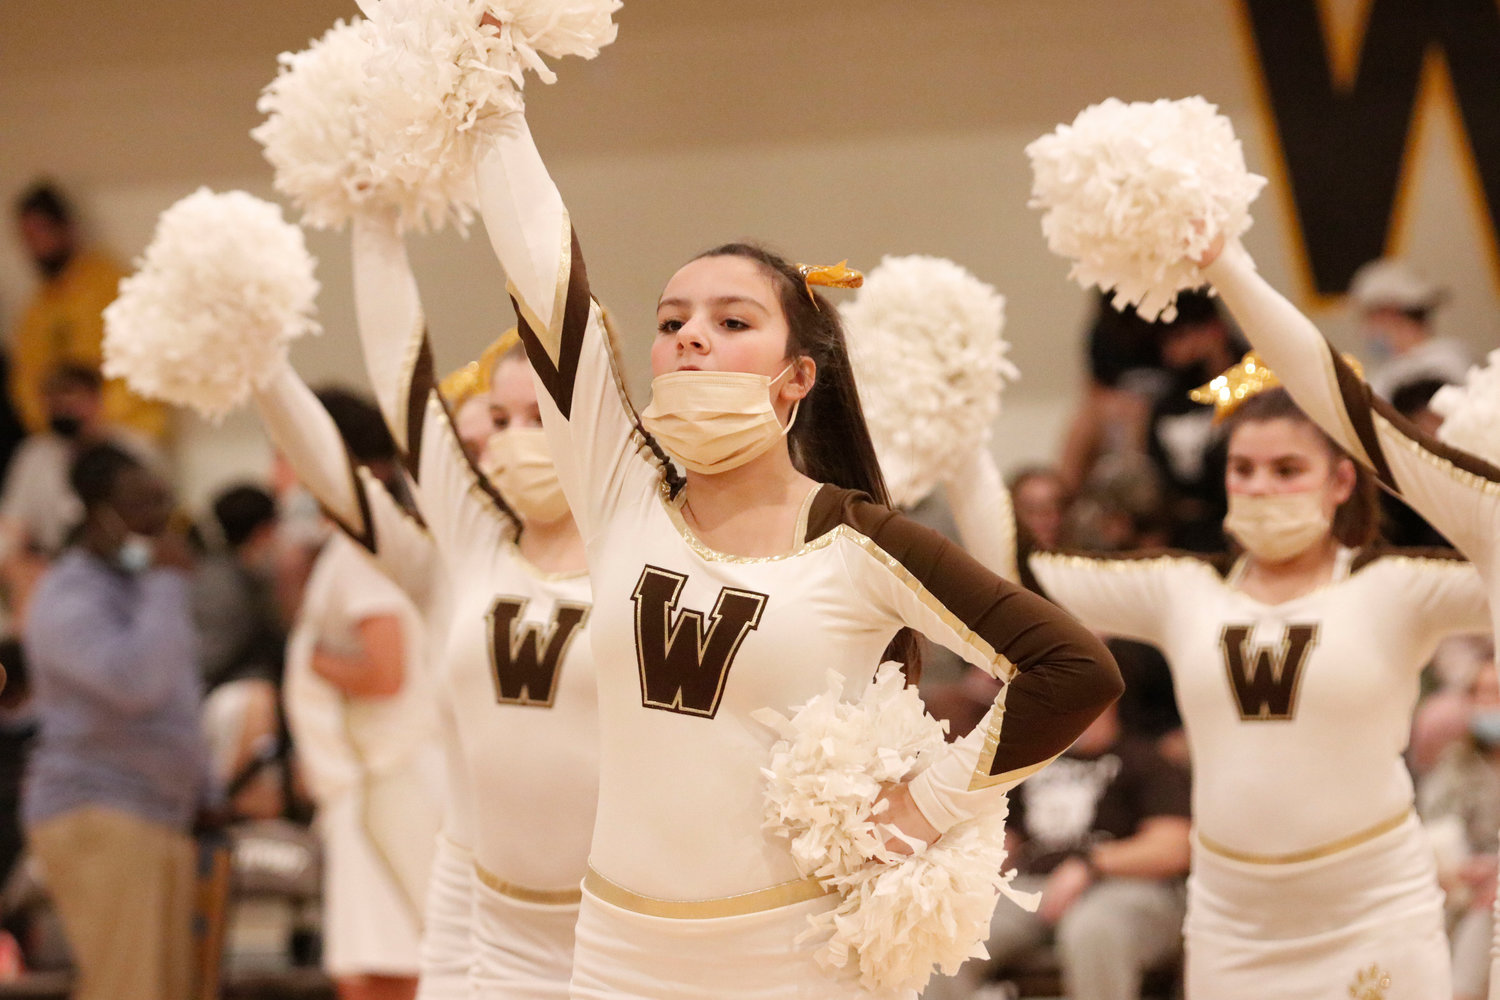 The Westport cheerleaders performed in between quarters and at halftime during the game.